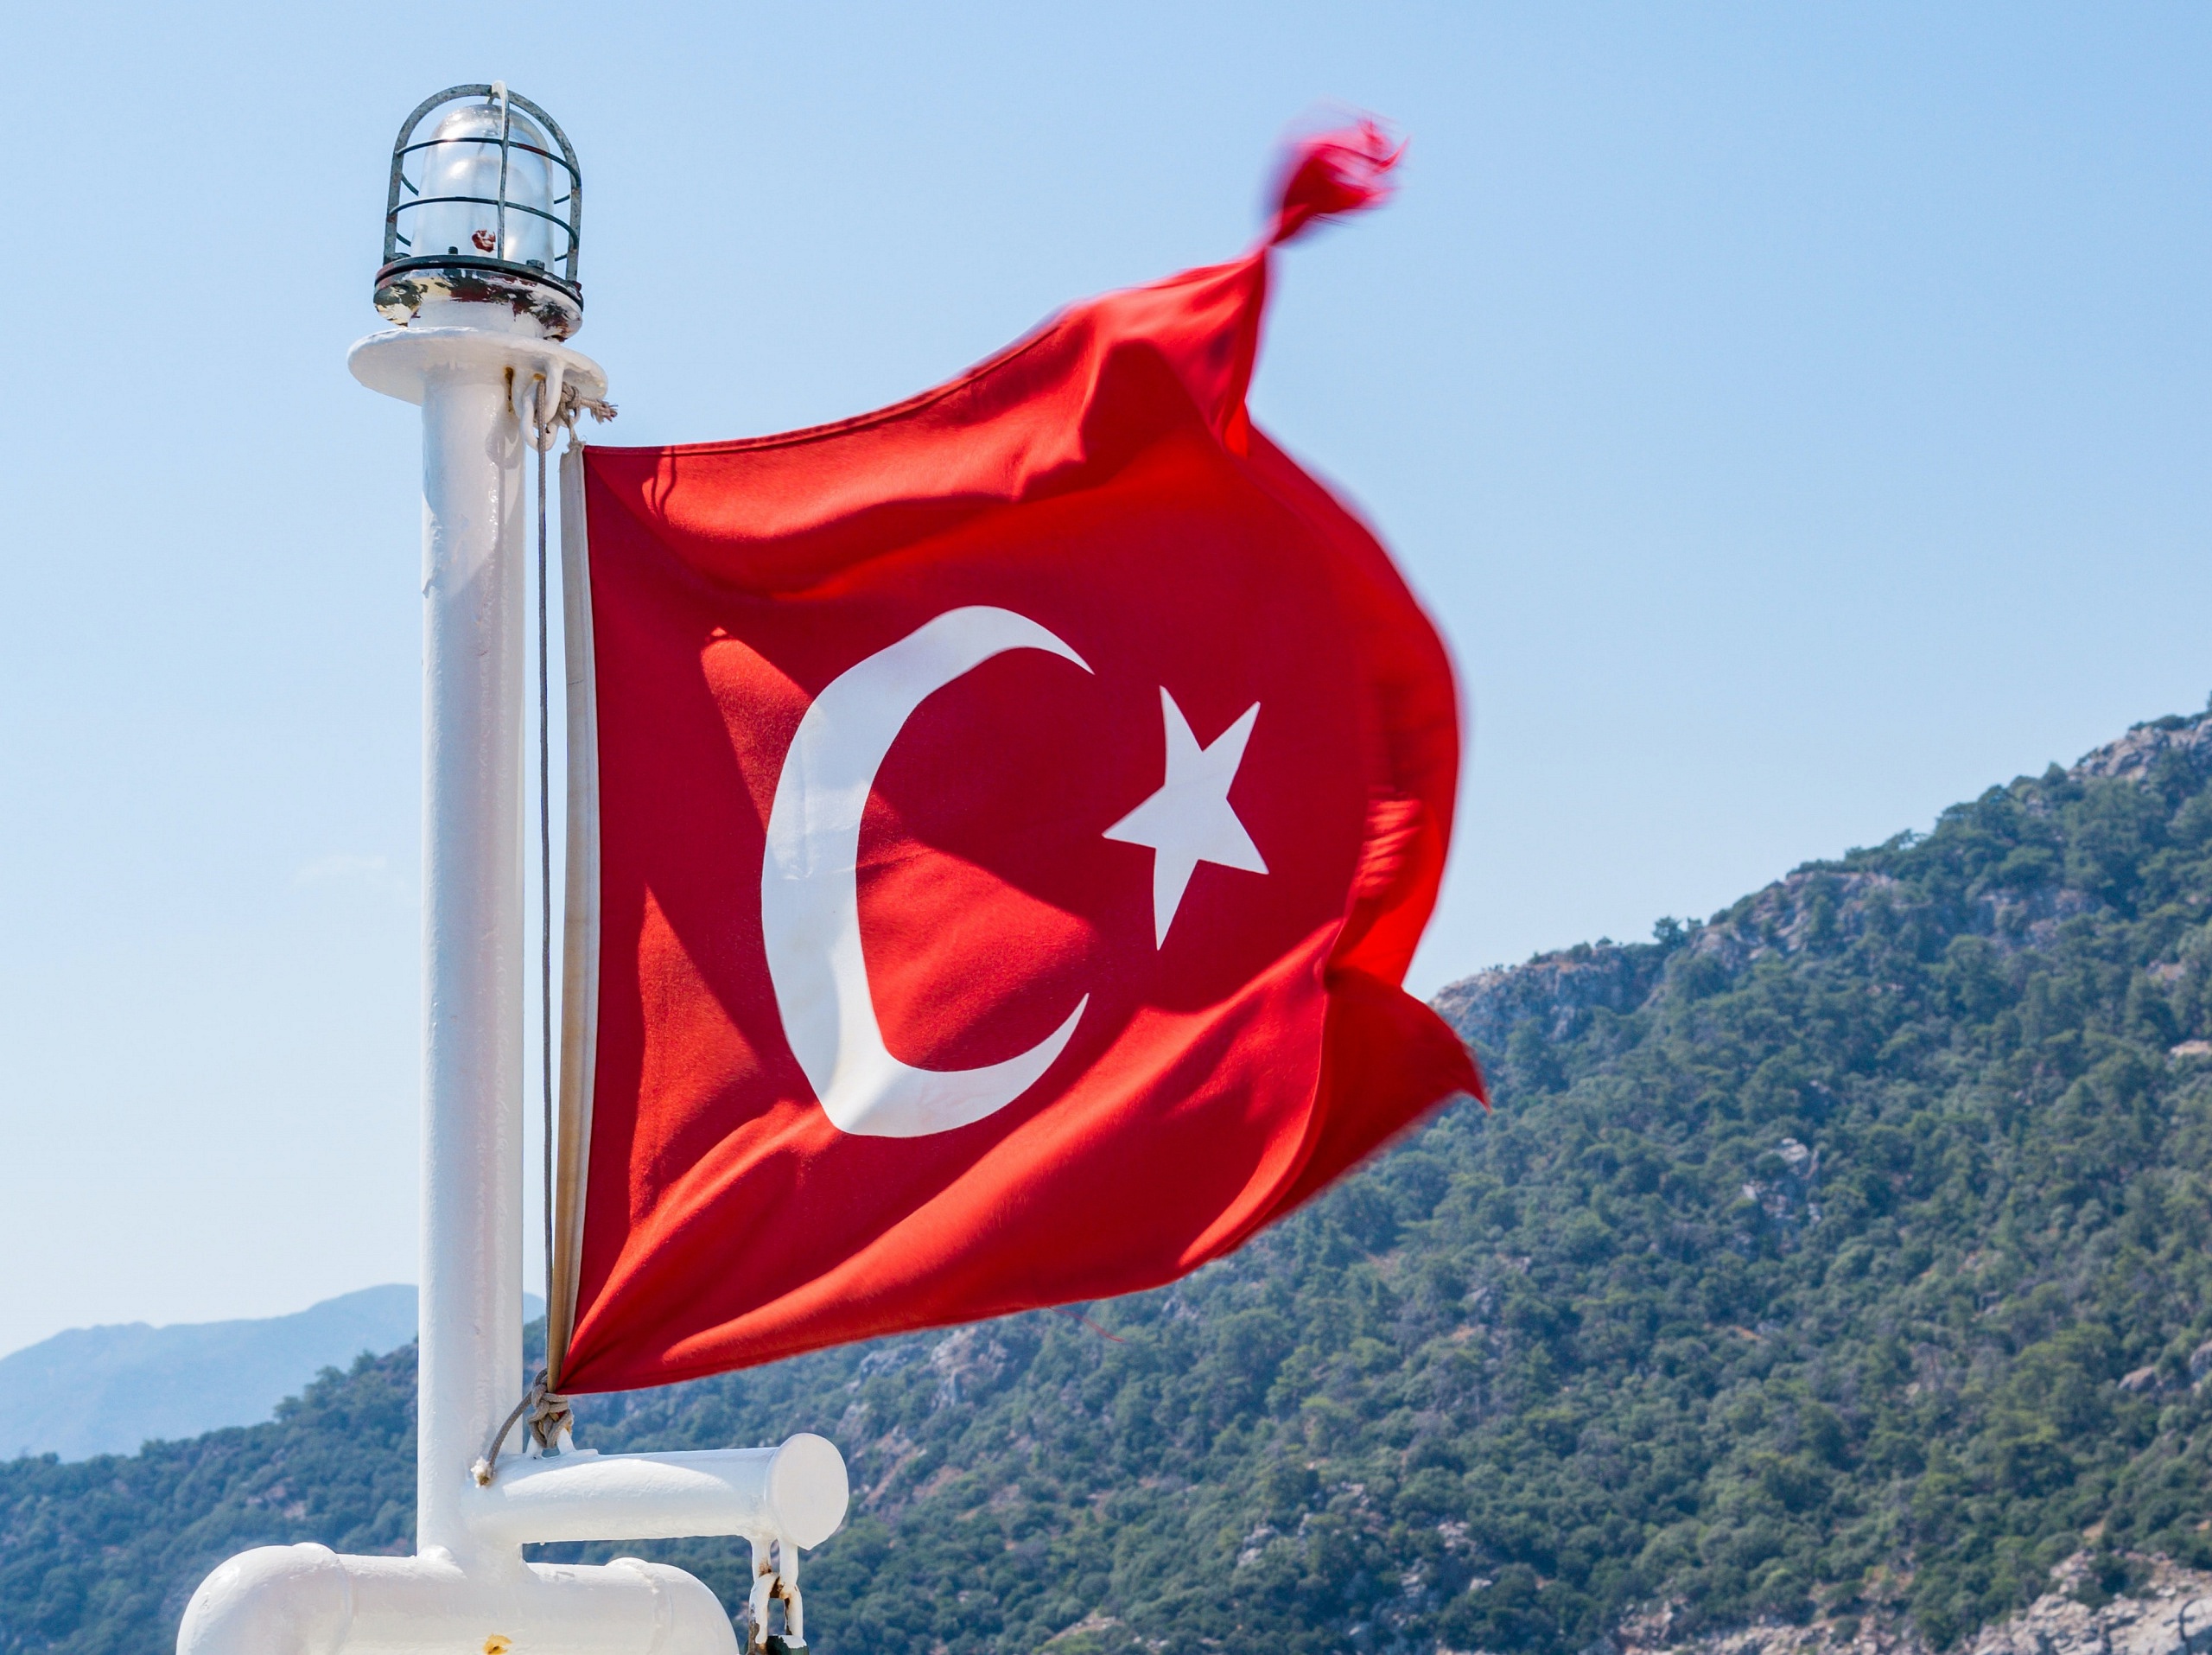 EU-Turkey relations and the accession negotiations